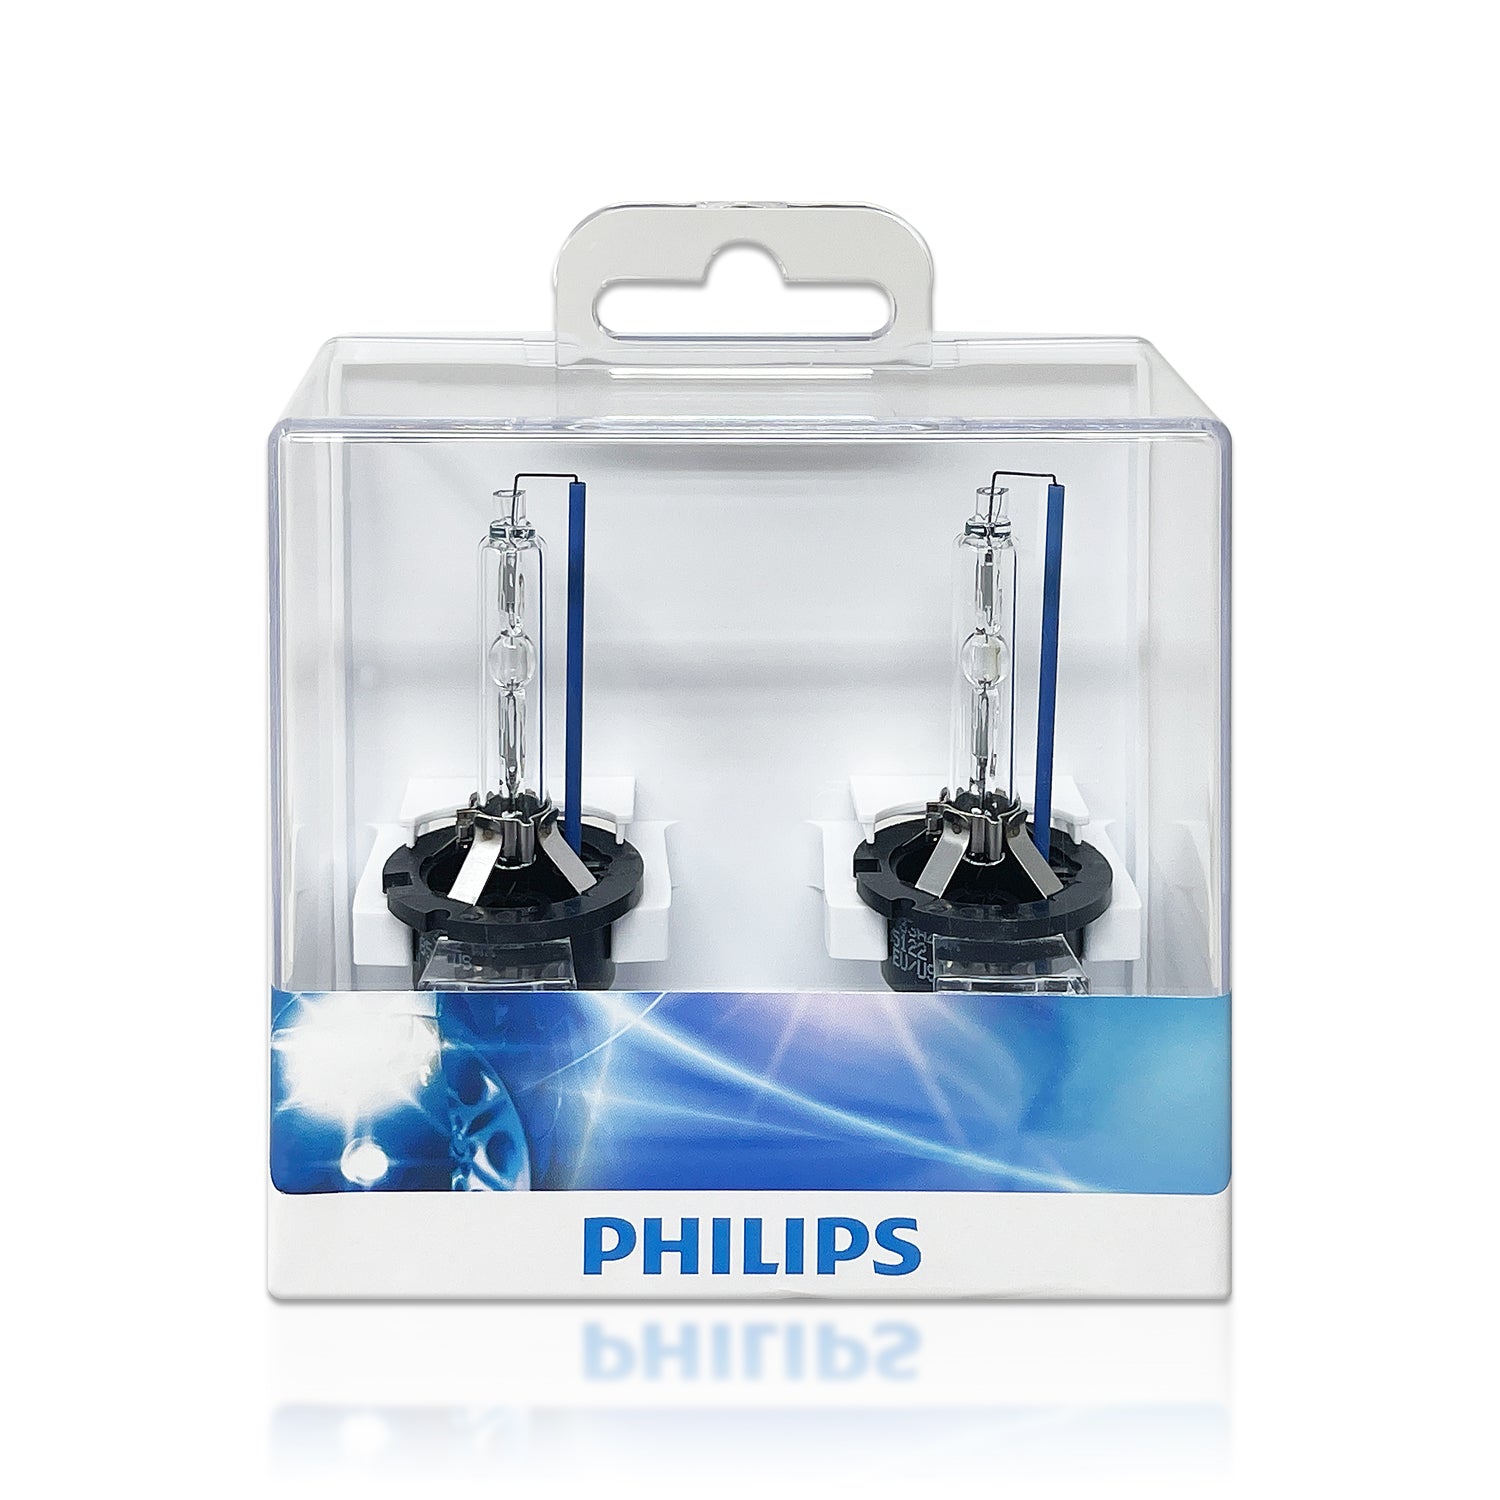 Philips Crystal Vision H7 Bulbs – HID CONCEPT